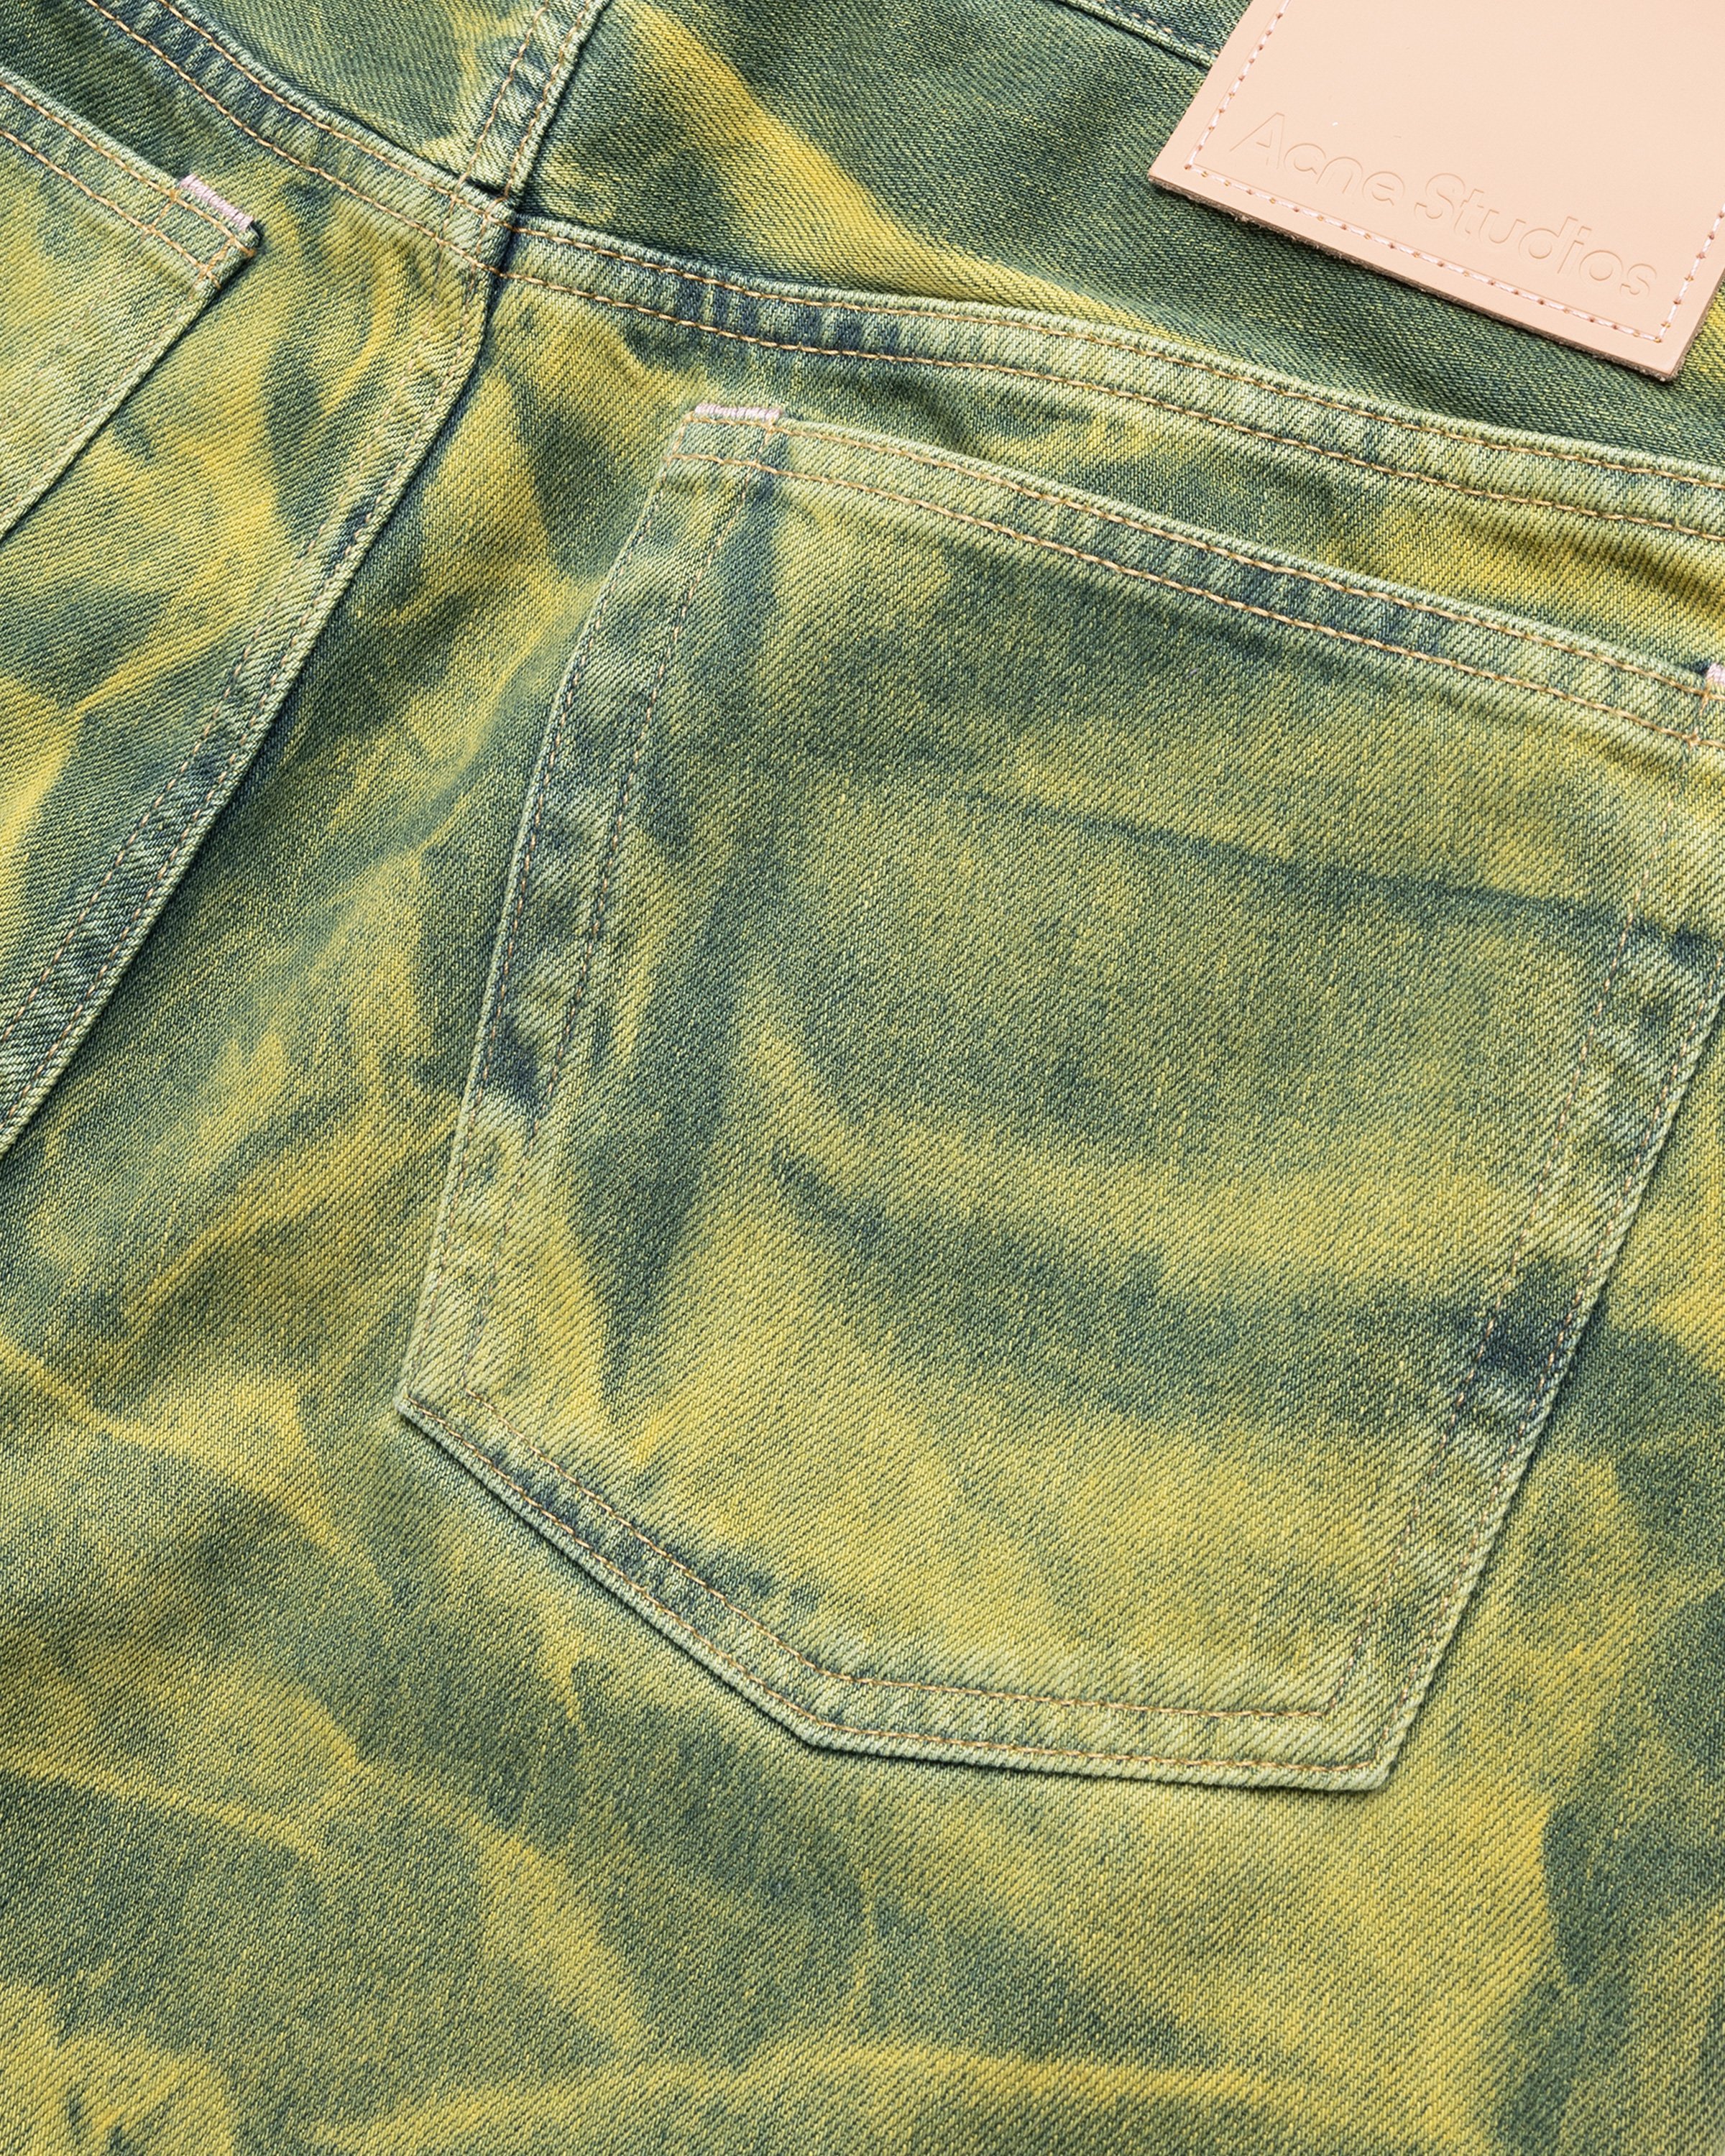 Acne Studios - Loose Fit Jeans 2021 Yellow/Blue - Clothing - Multi - Image 7